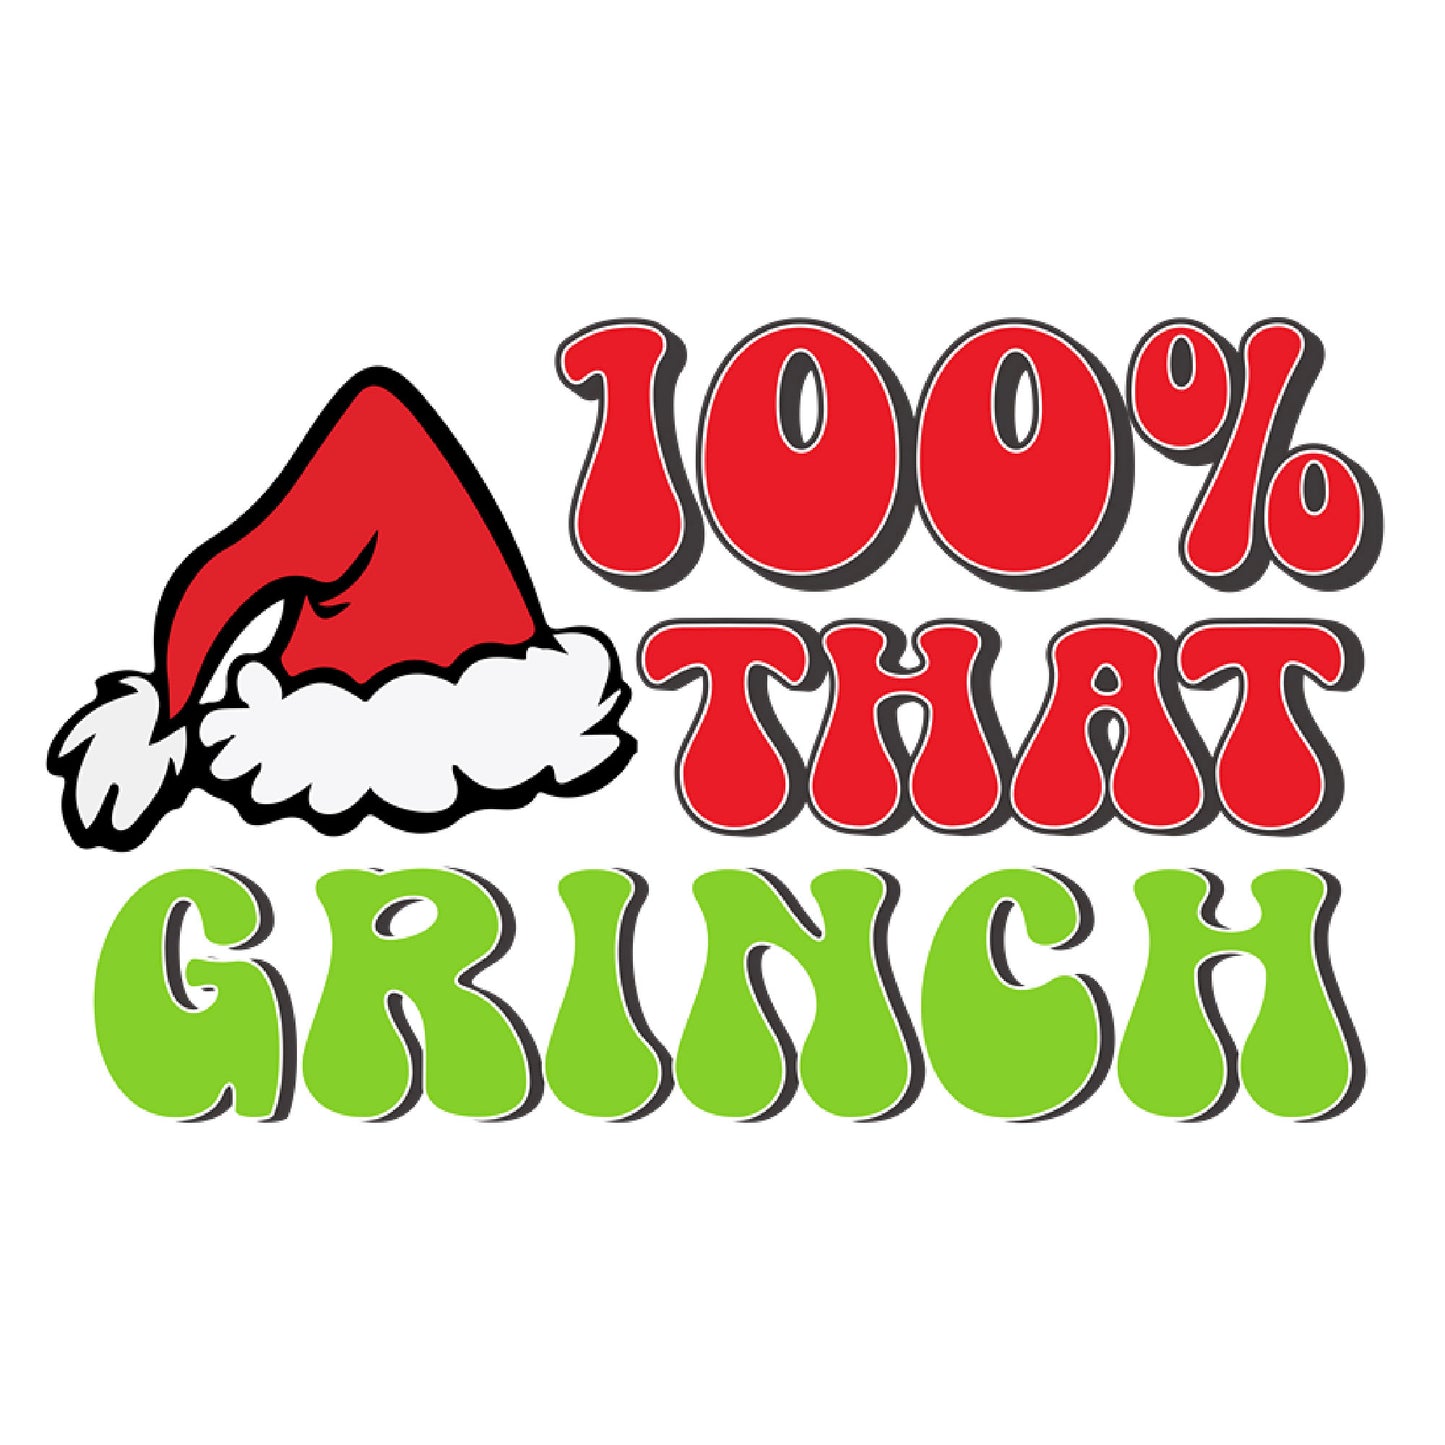 Capturing Christmas Contrasts: '100% That Grinch' Shirt with Santa Claus Hat